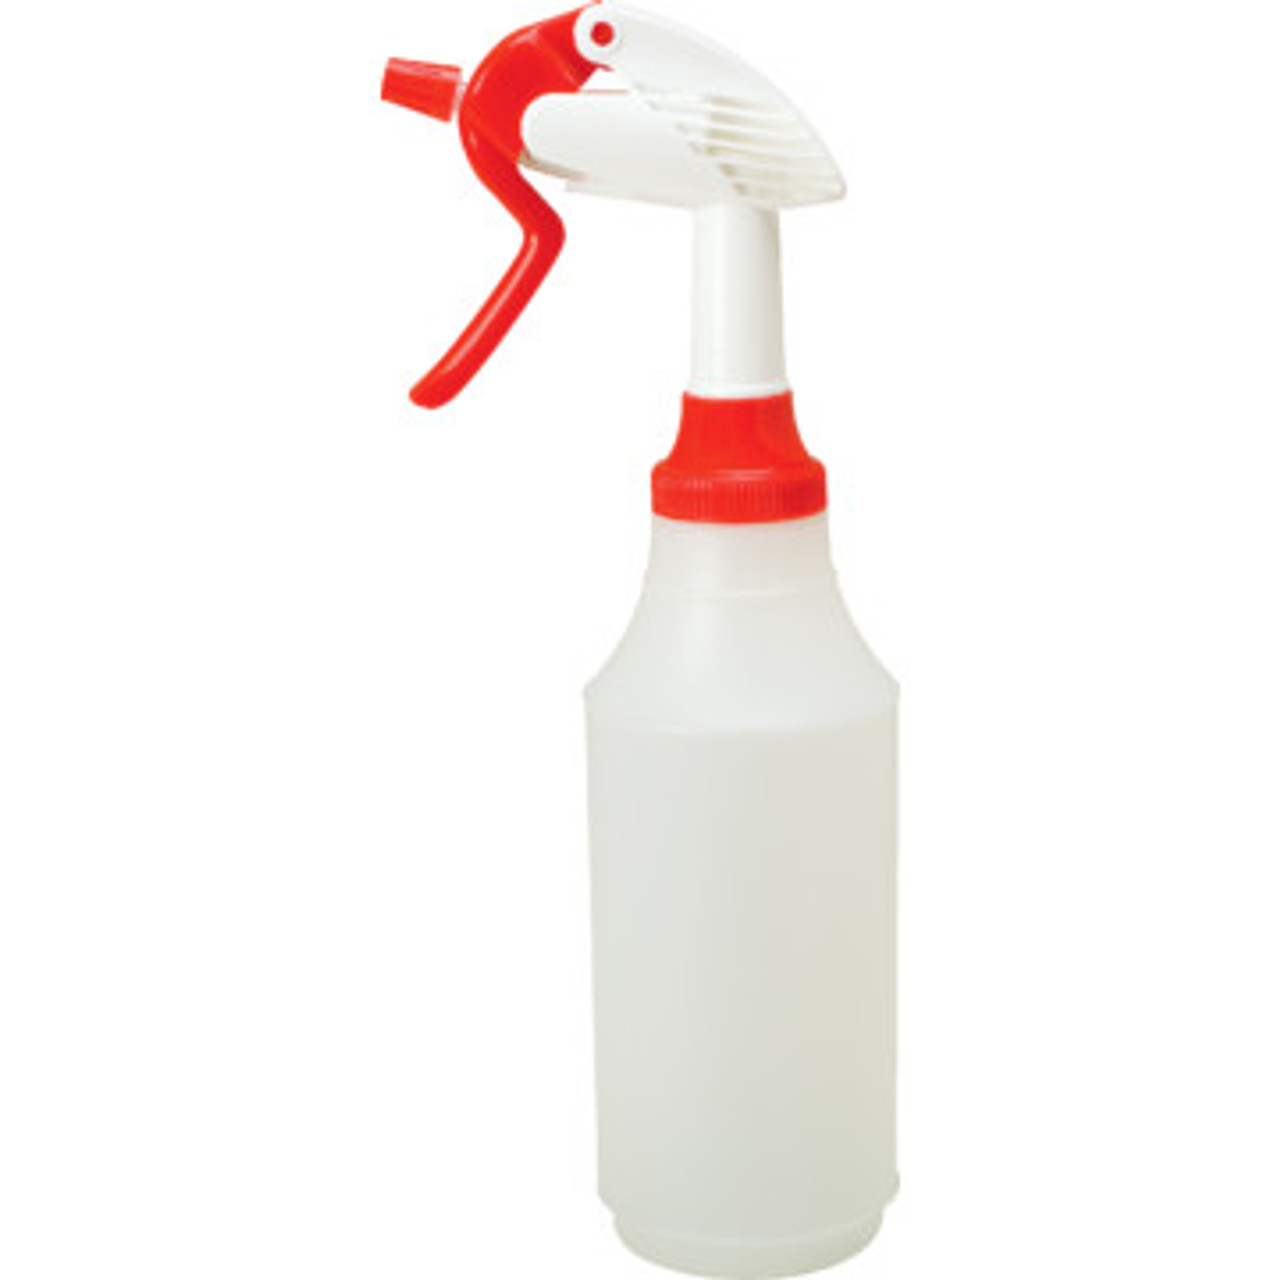 Delta 32oz Wide Mouth Multipurpose Spray Bottle for Cleaning Solutions etc.  